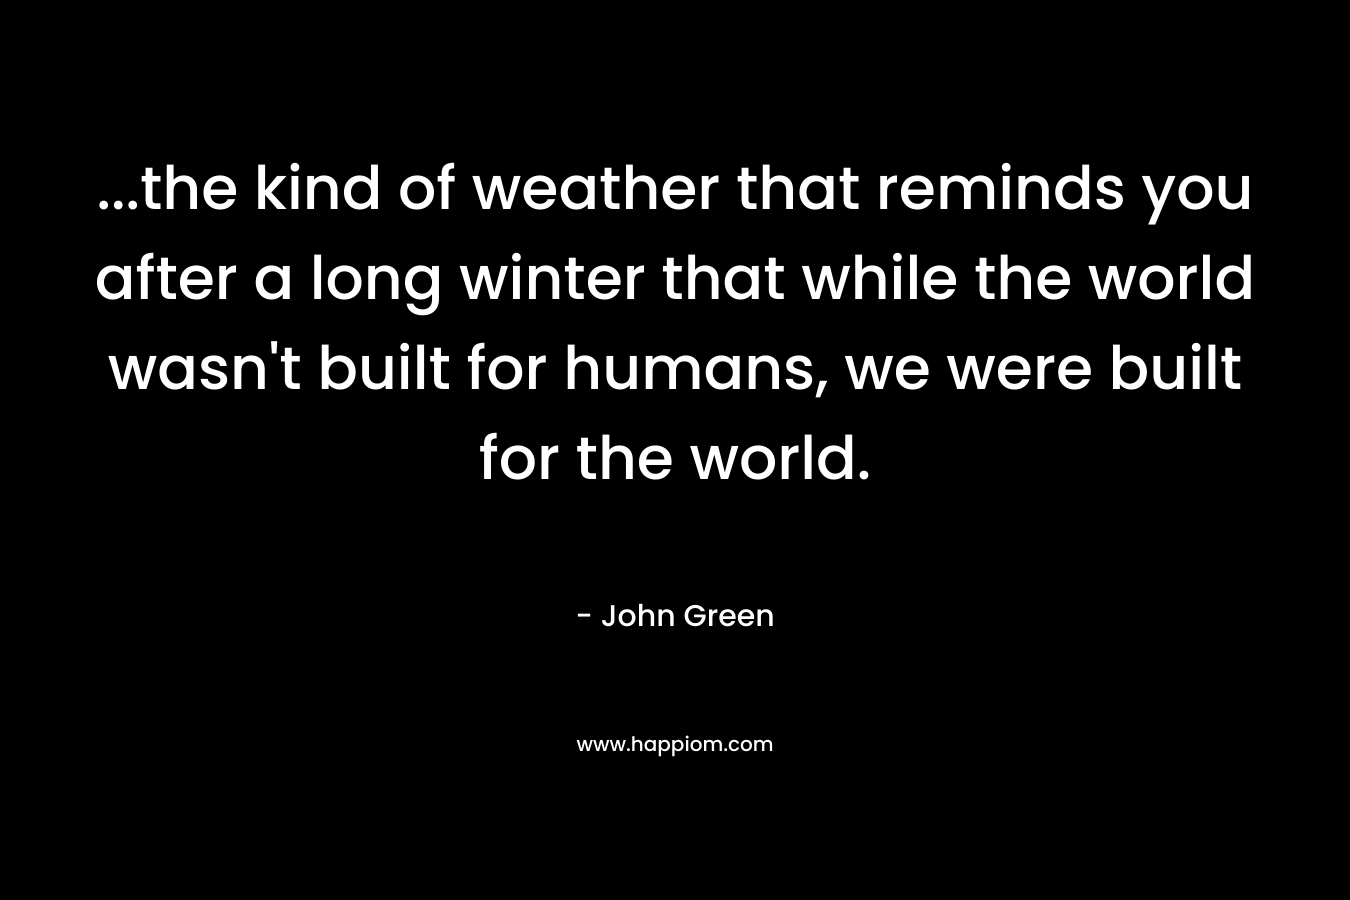 …the kind of weather that reminds you after a long winter that while the world wasn’t built for humans, we were built for the world. – John Green